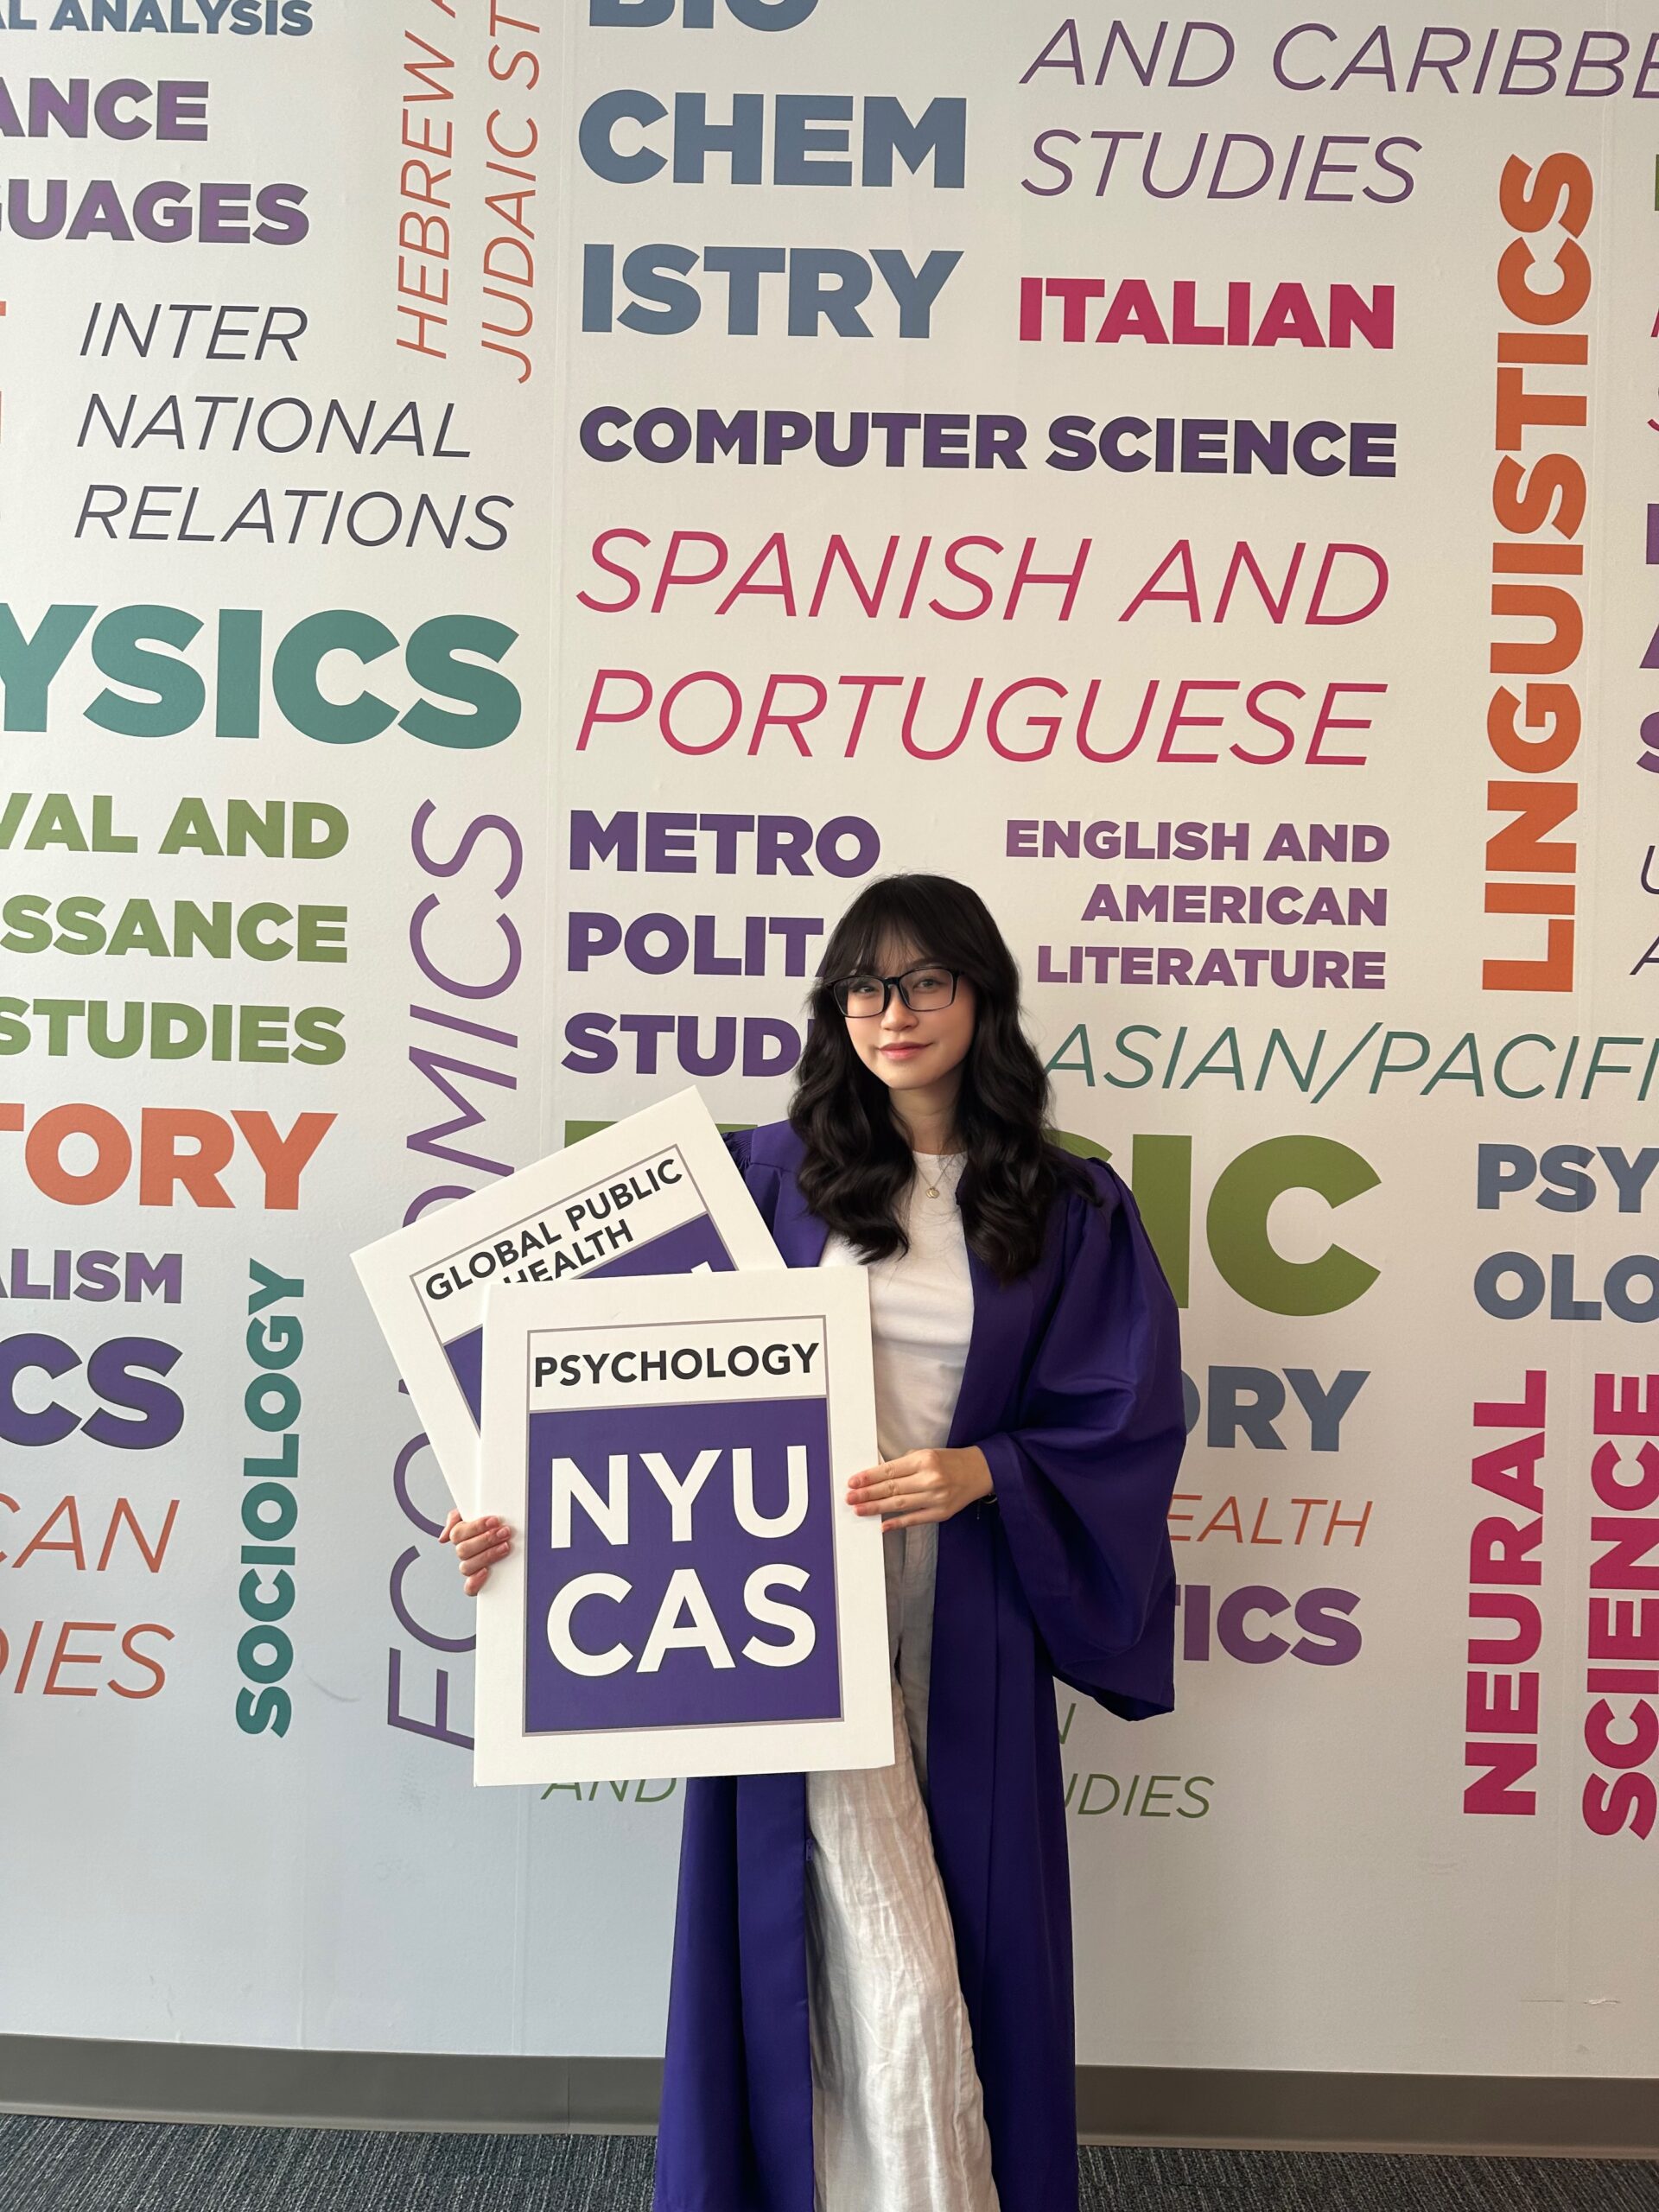 Yasmin Hung, adorned in her graduation attire, holds a sign declaring her affiliation with NYU’s College of Arts and Science, majoring in Psychology.